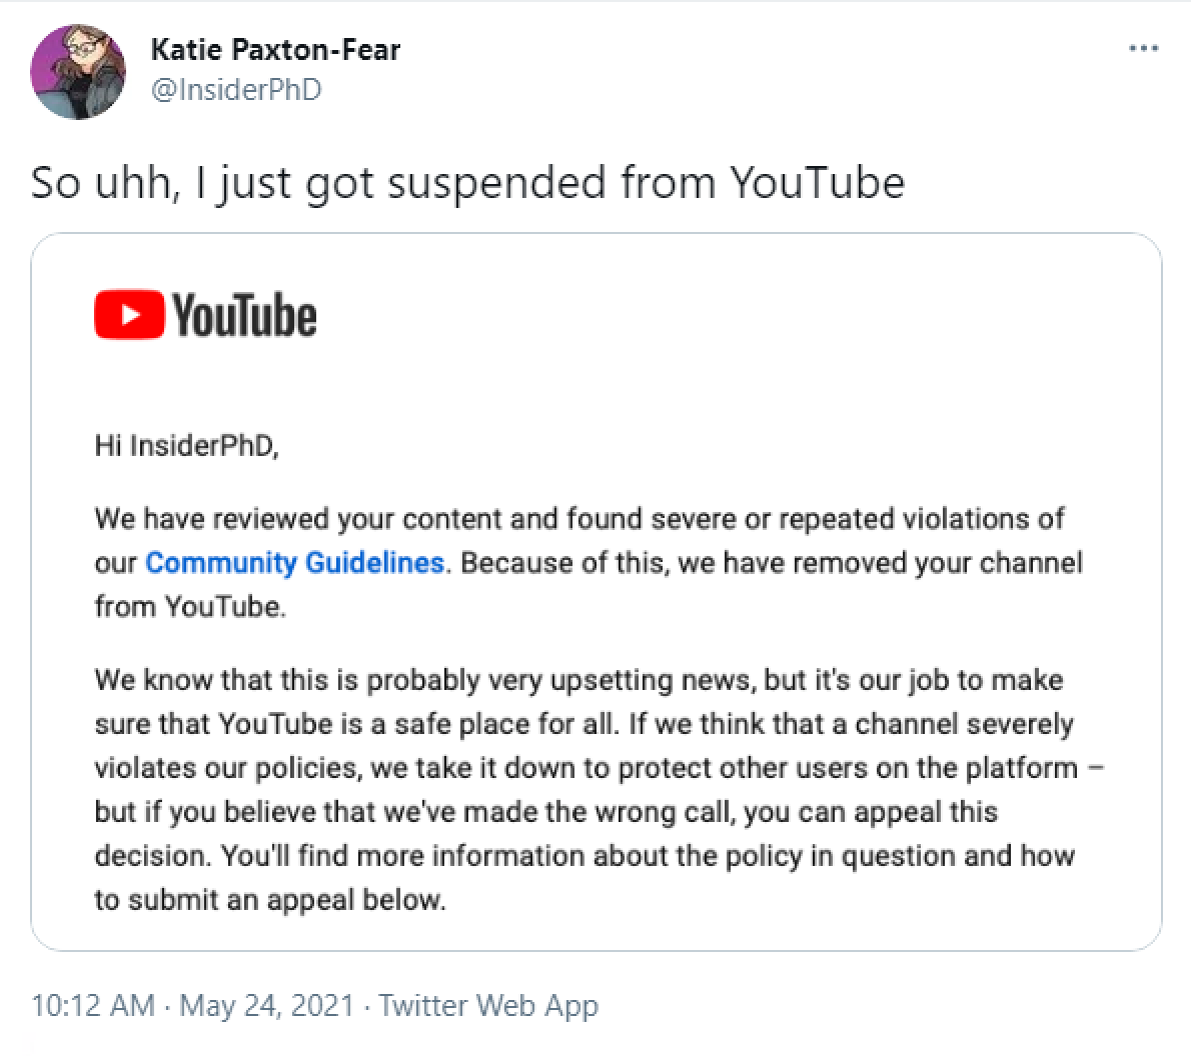 The InsiderPhD channel was suspended from YouTube on May 24